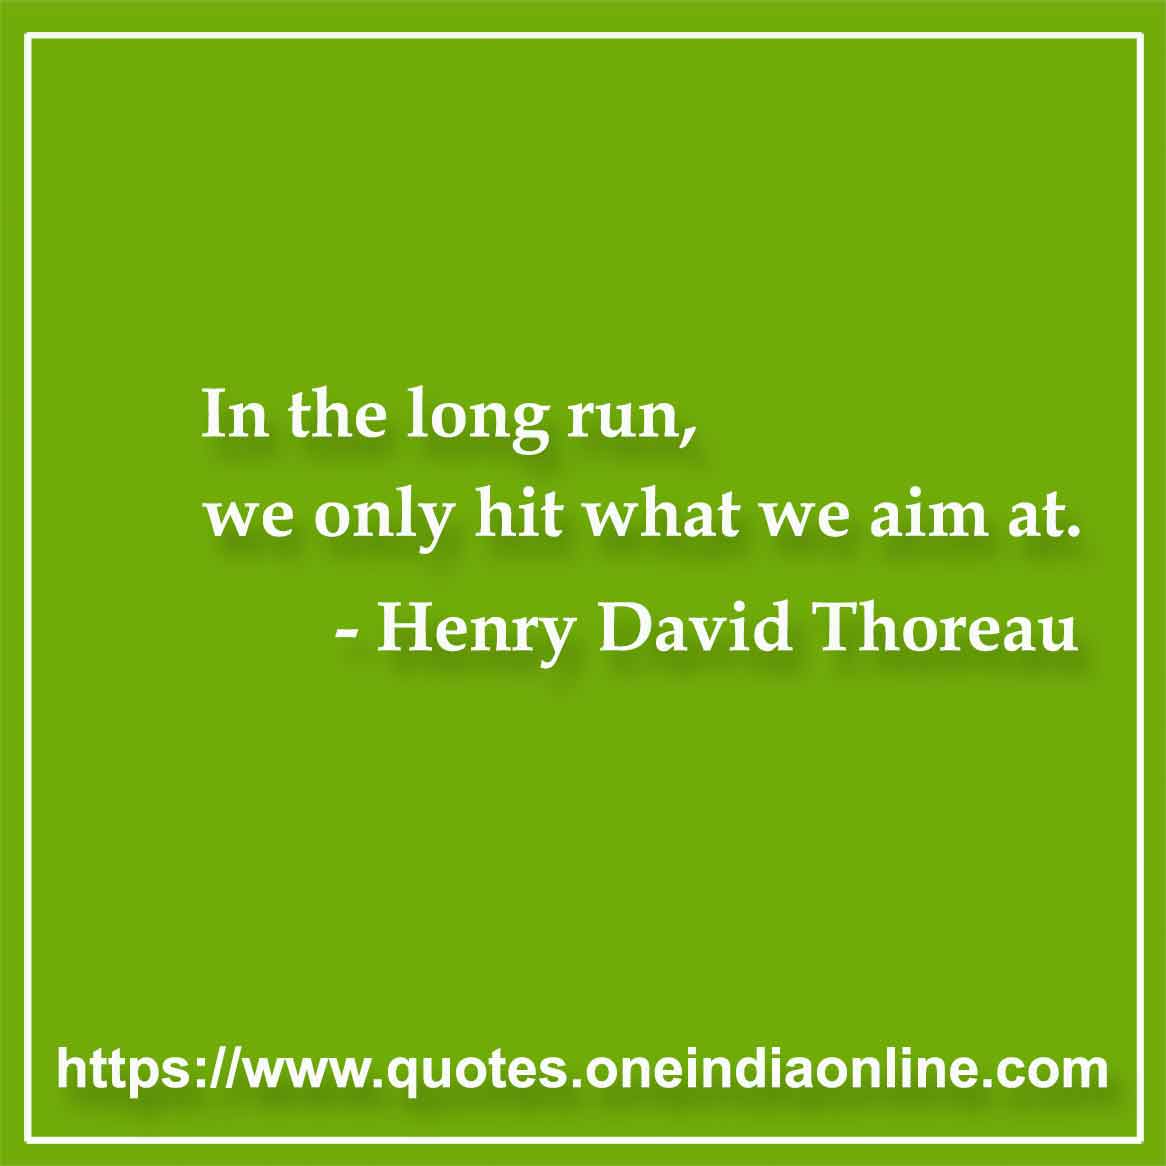 In the long run, we only hit what we aim at.

- Short  by Henry David Thoreau